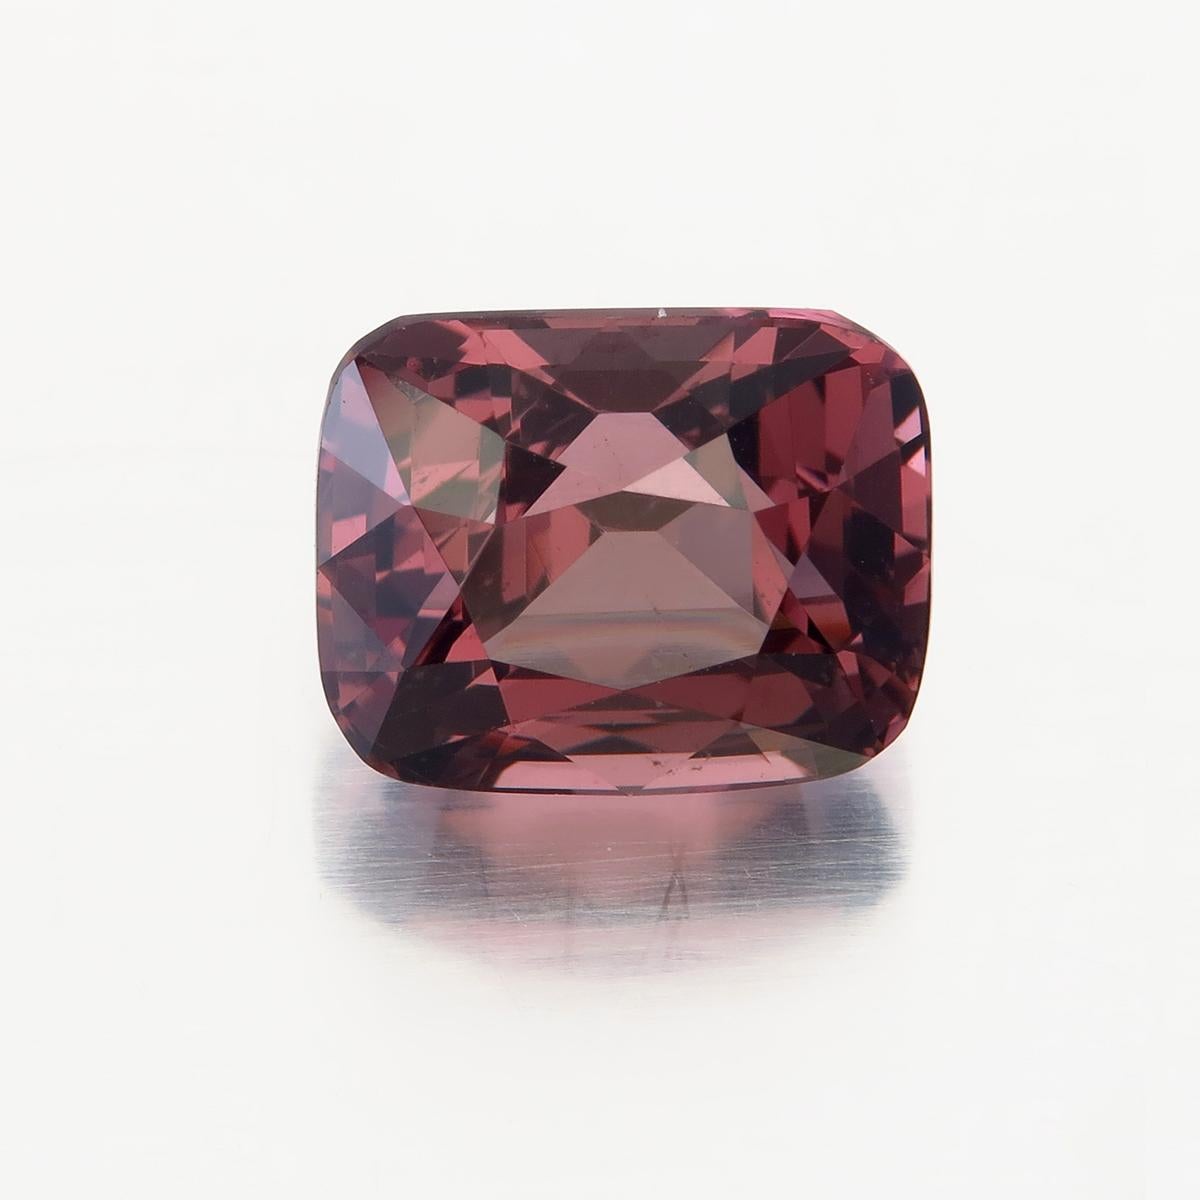 Lotus Certified 3.78 Carat Pink Spinel from Sri Lanka known in the past variously as Serendib or the 